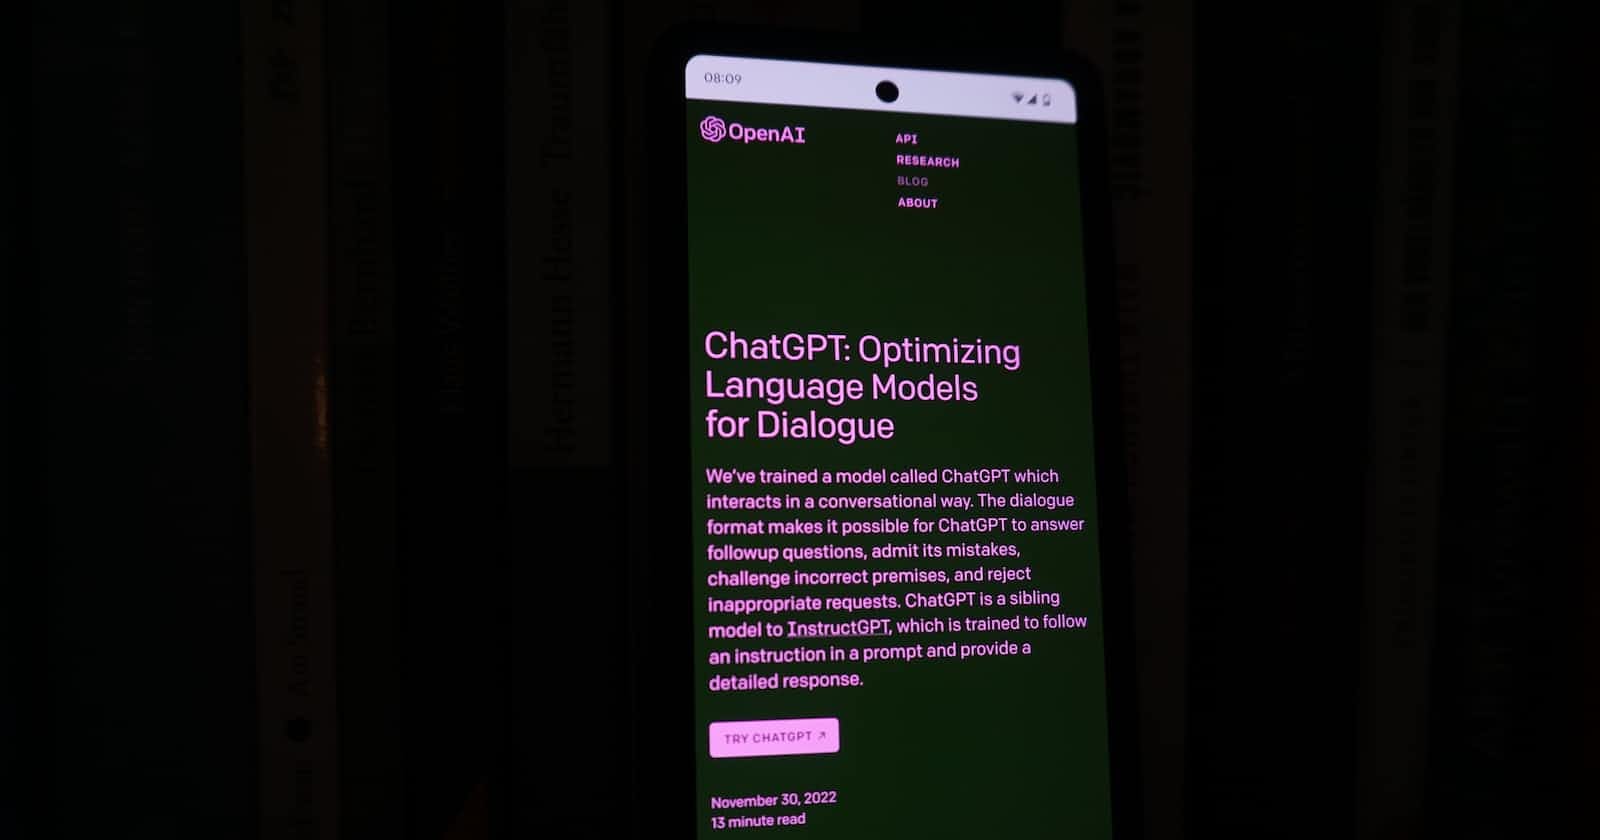 Openai’s Chatgpt Ios App Now Available In Canada, India, Brazil And 30 More Countries Explained in Fewer than 140 Characters